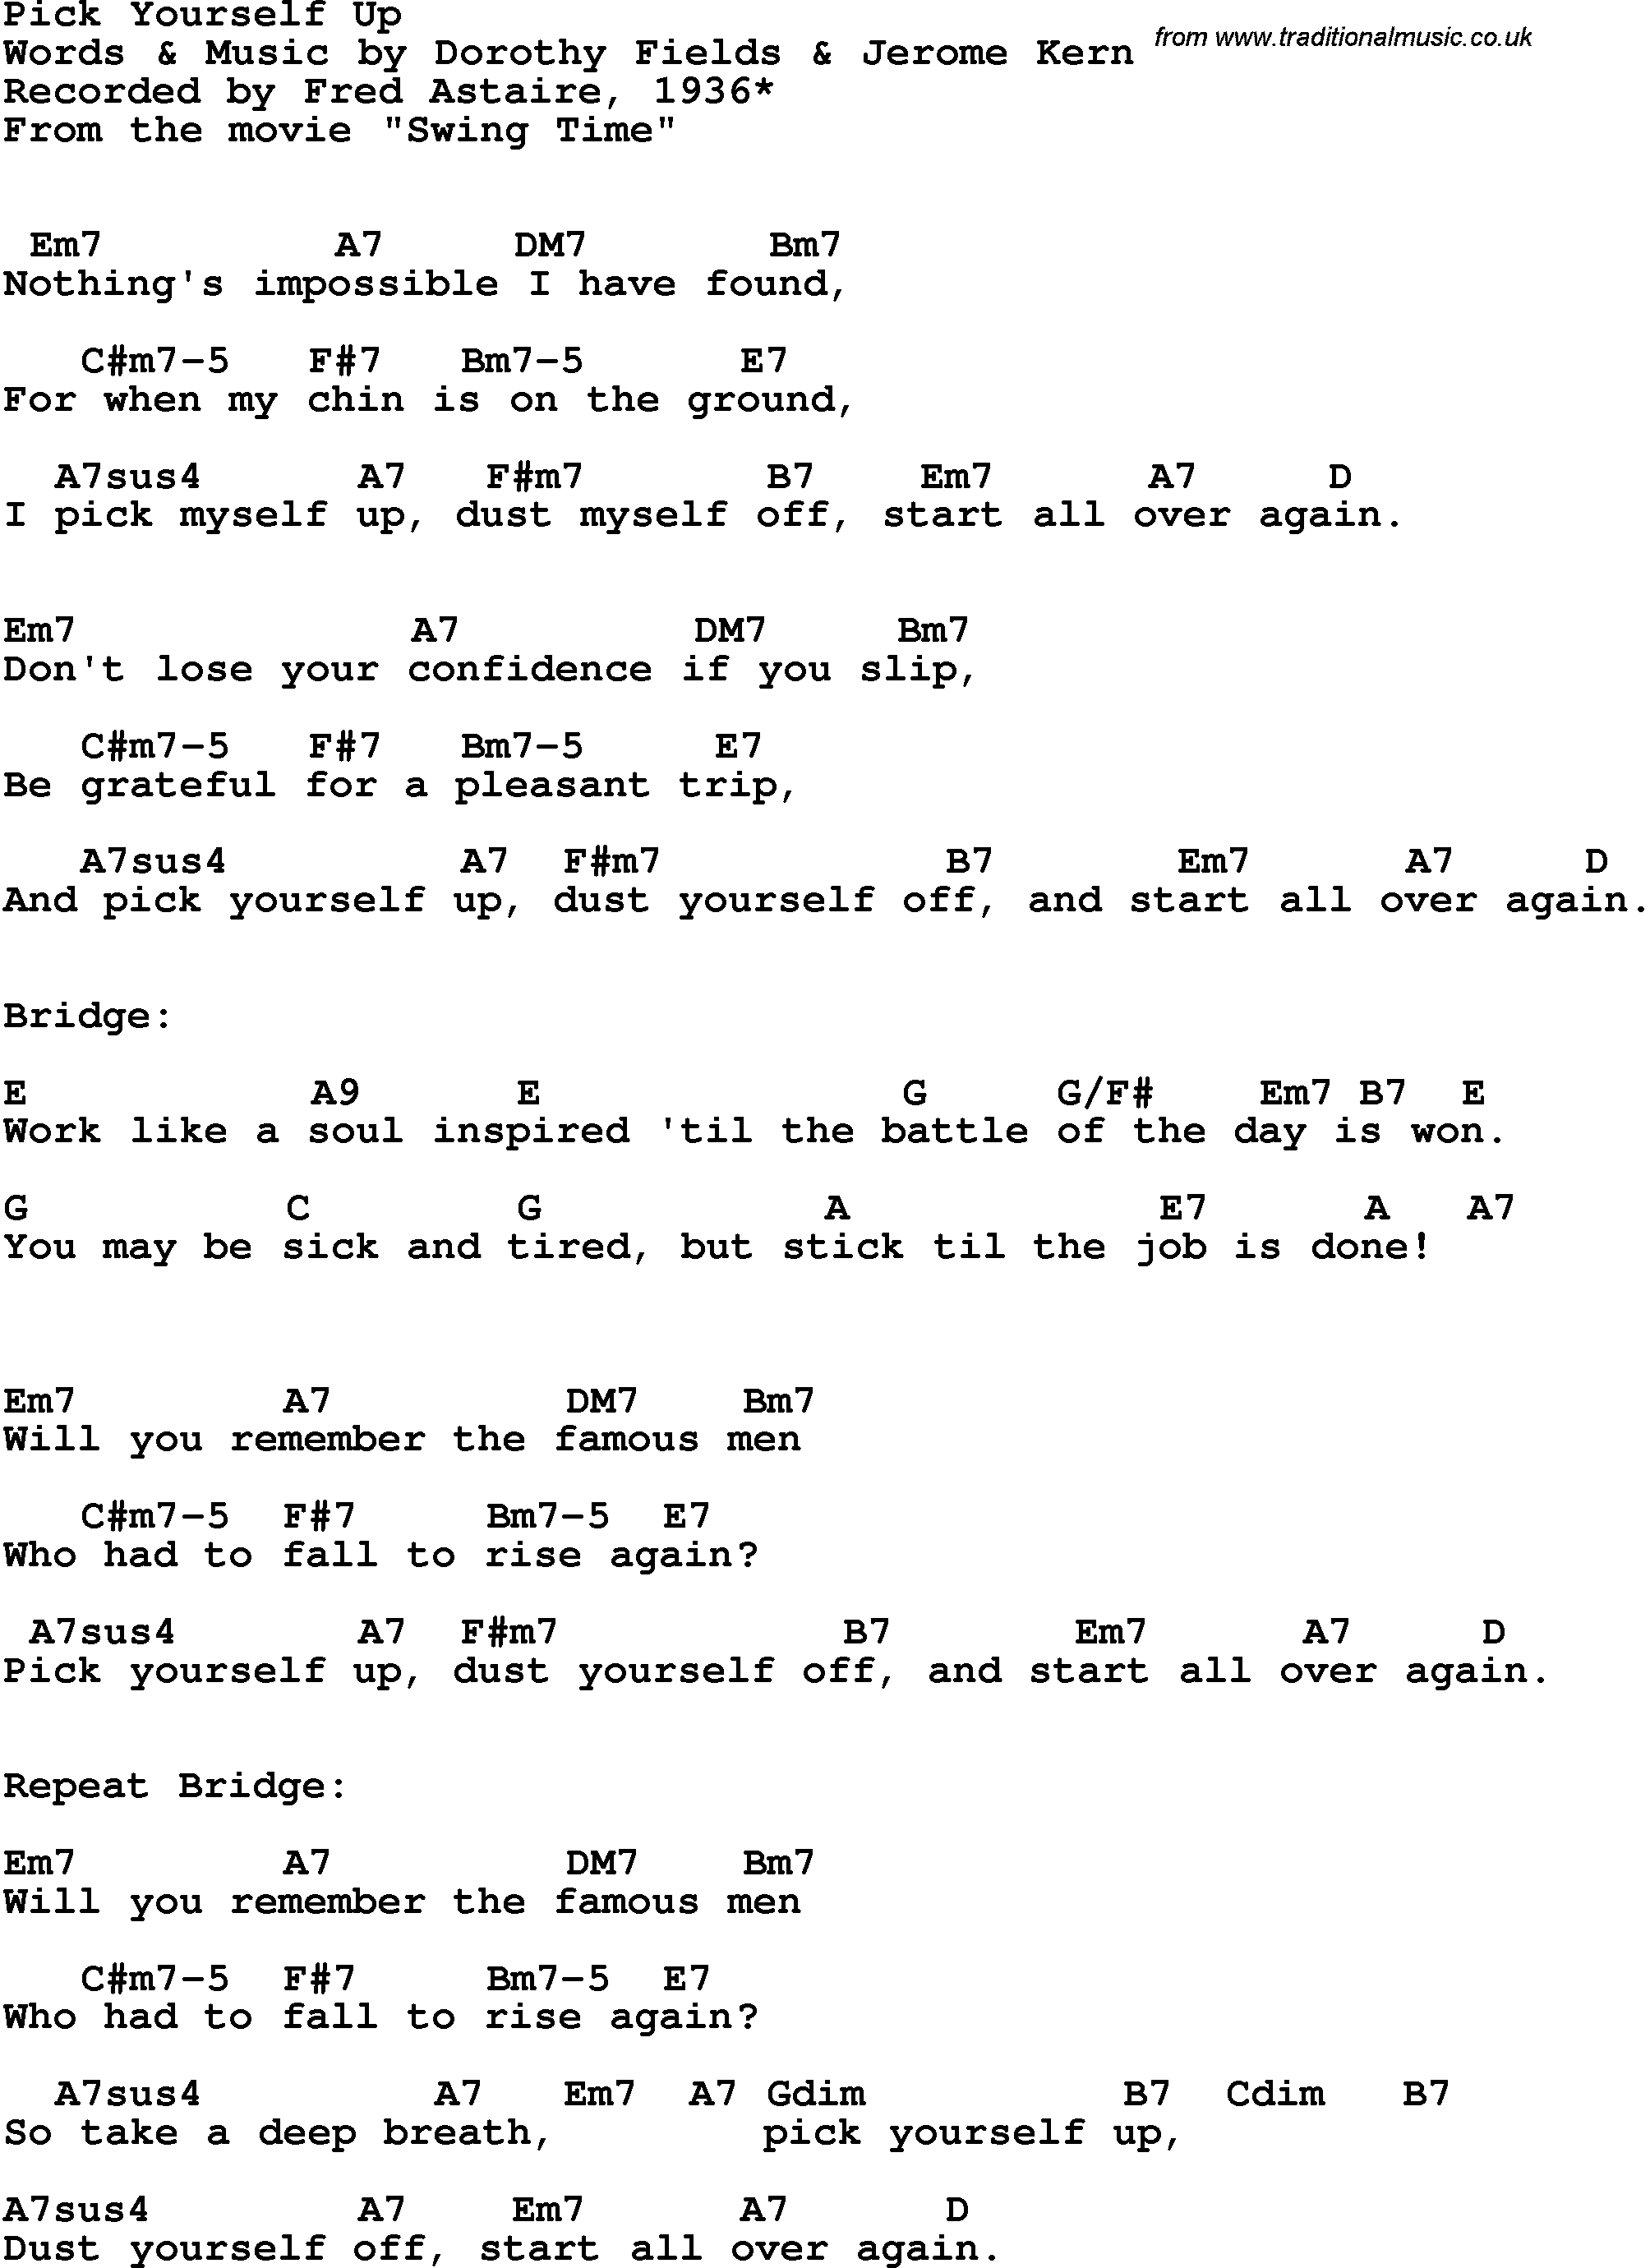 Song Lyrics with guitar chords for Pick Yourself Up - Fred Astaire, 1936